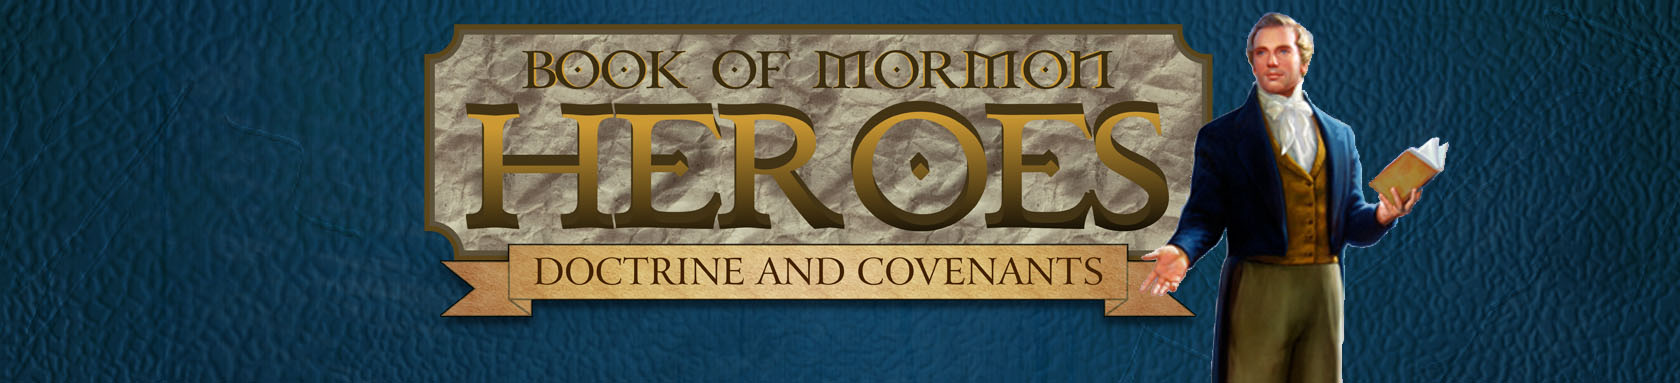 Book of Mormon Heroes Doctrine and Covenants